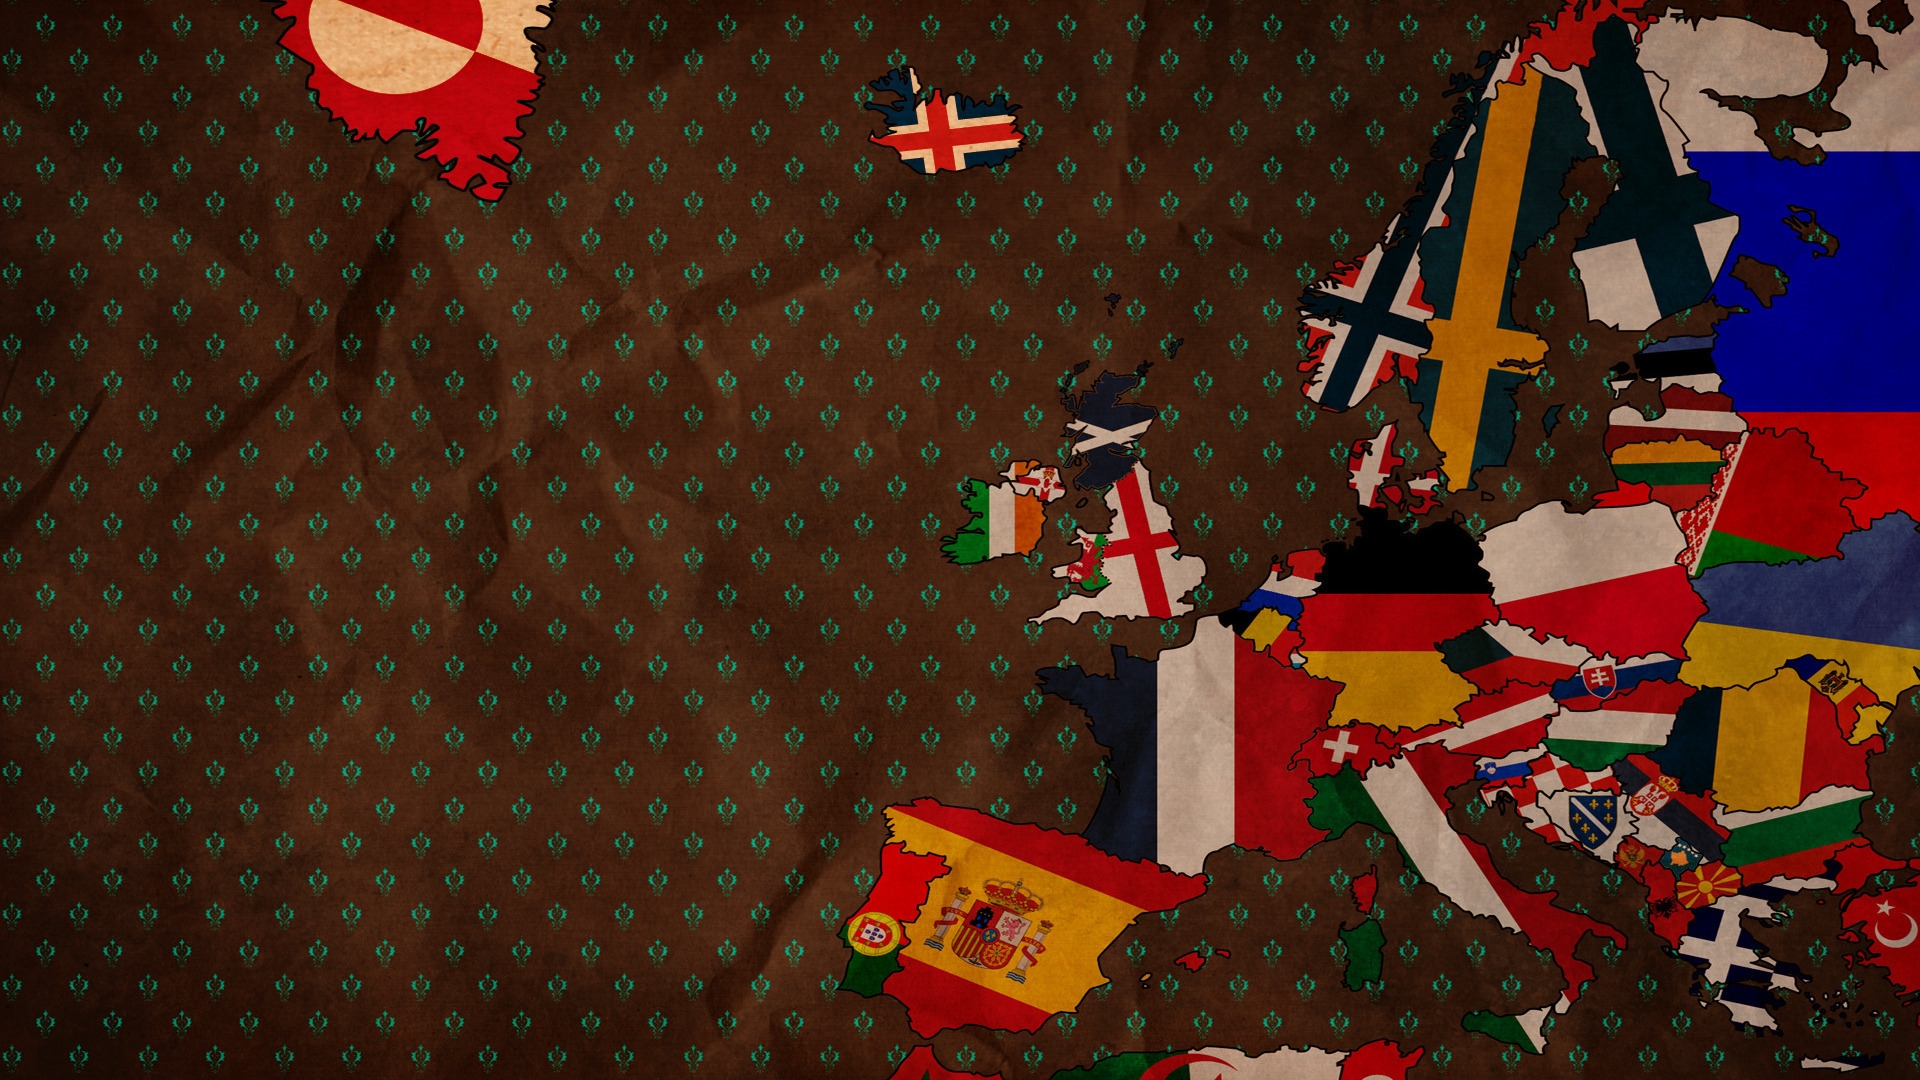 Bits of Flags for 1920 x 1080 HDTV 1080p resolution